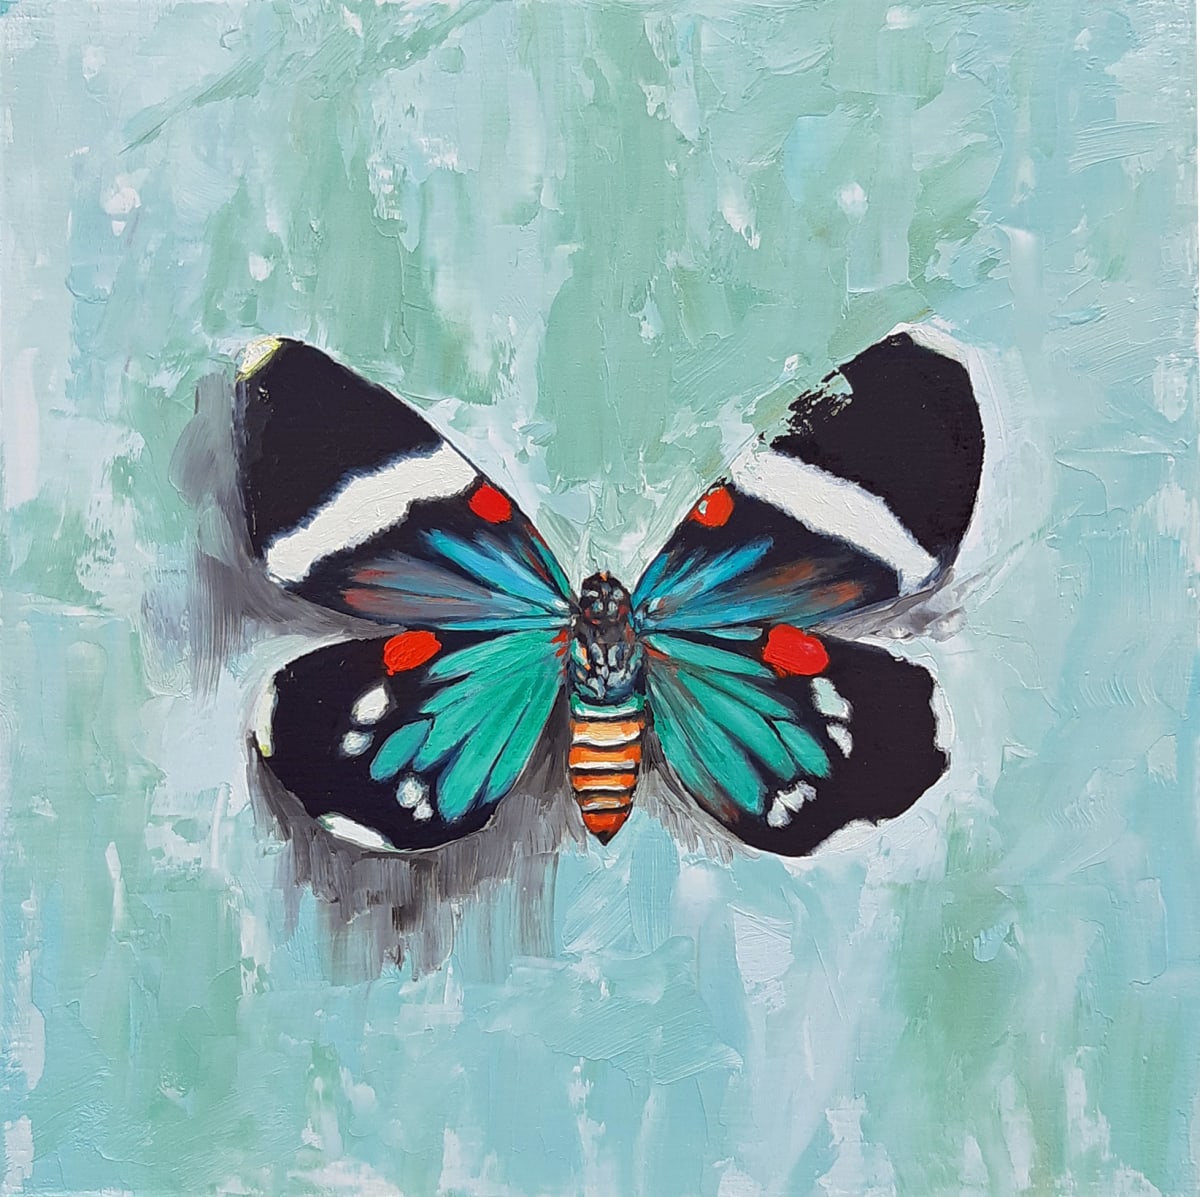 Blue Calm by Catherine Mills  Image: Teal and red butterfly, on blue background with striking black and white markings